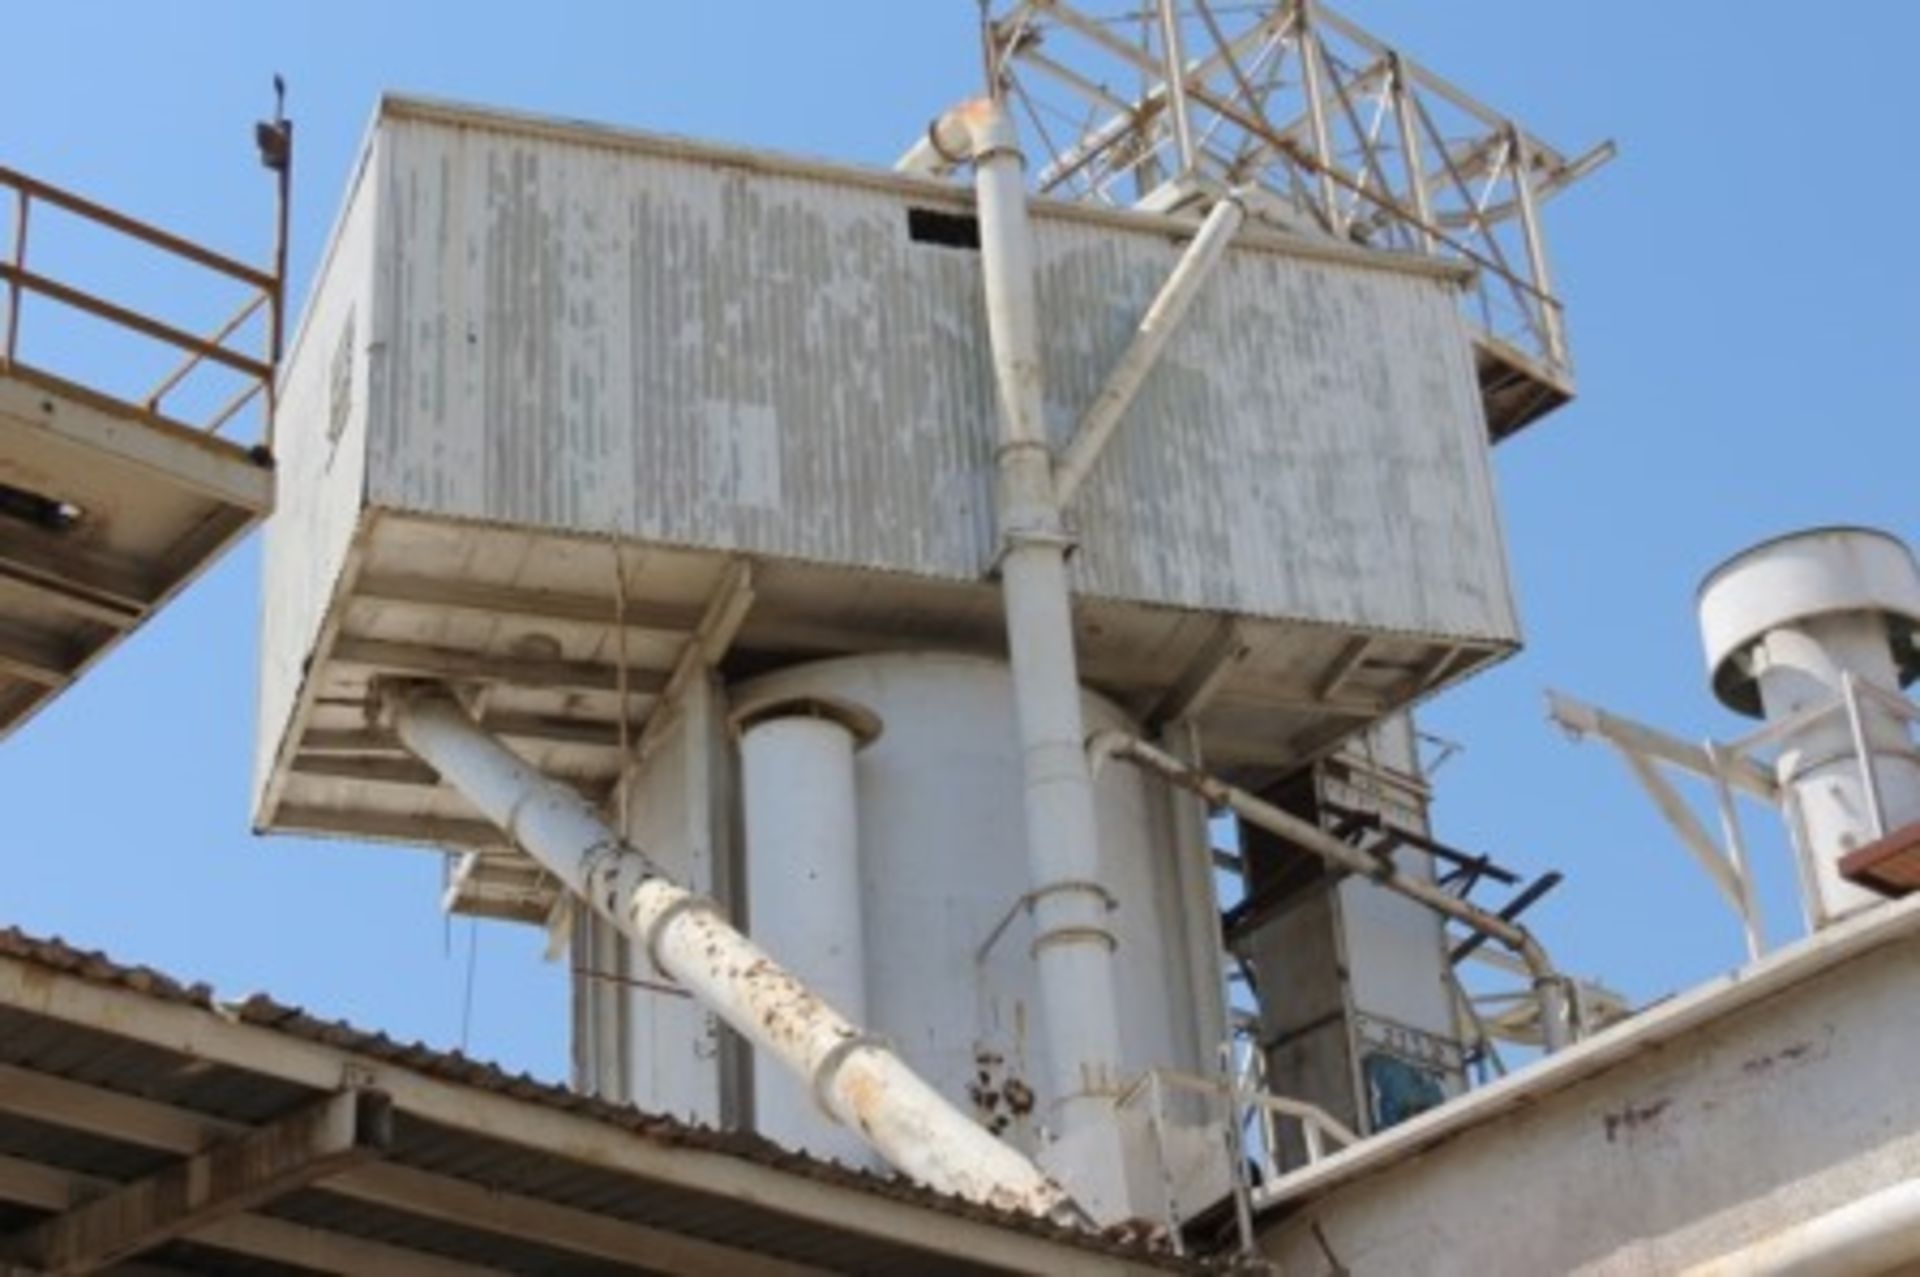 Dust collector, with 2 150 hp centrifugal blowers, filters, ducts, cooling tower - Image 39 of 46